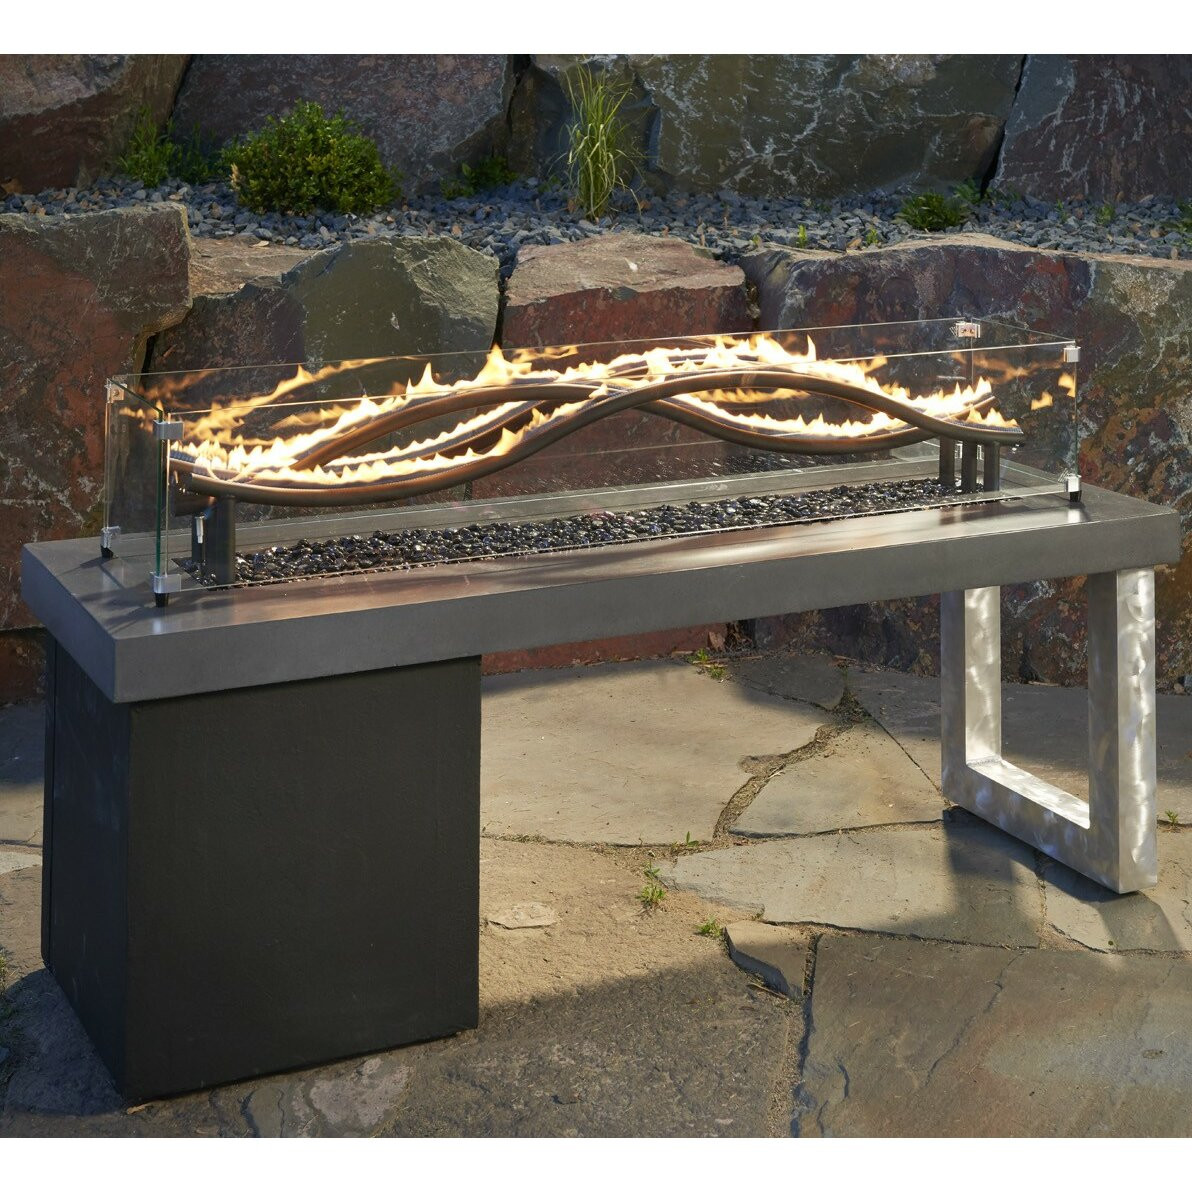 Backyard Propane Fire Pit
 The Outdoor GreatRoom pany Wave Propane Fire Pit